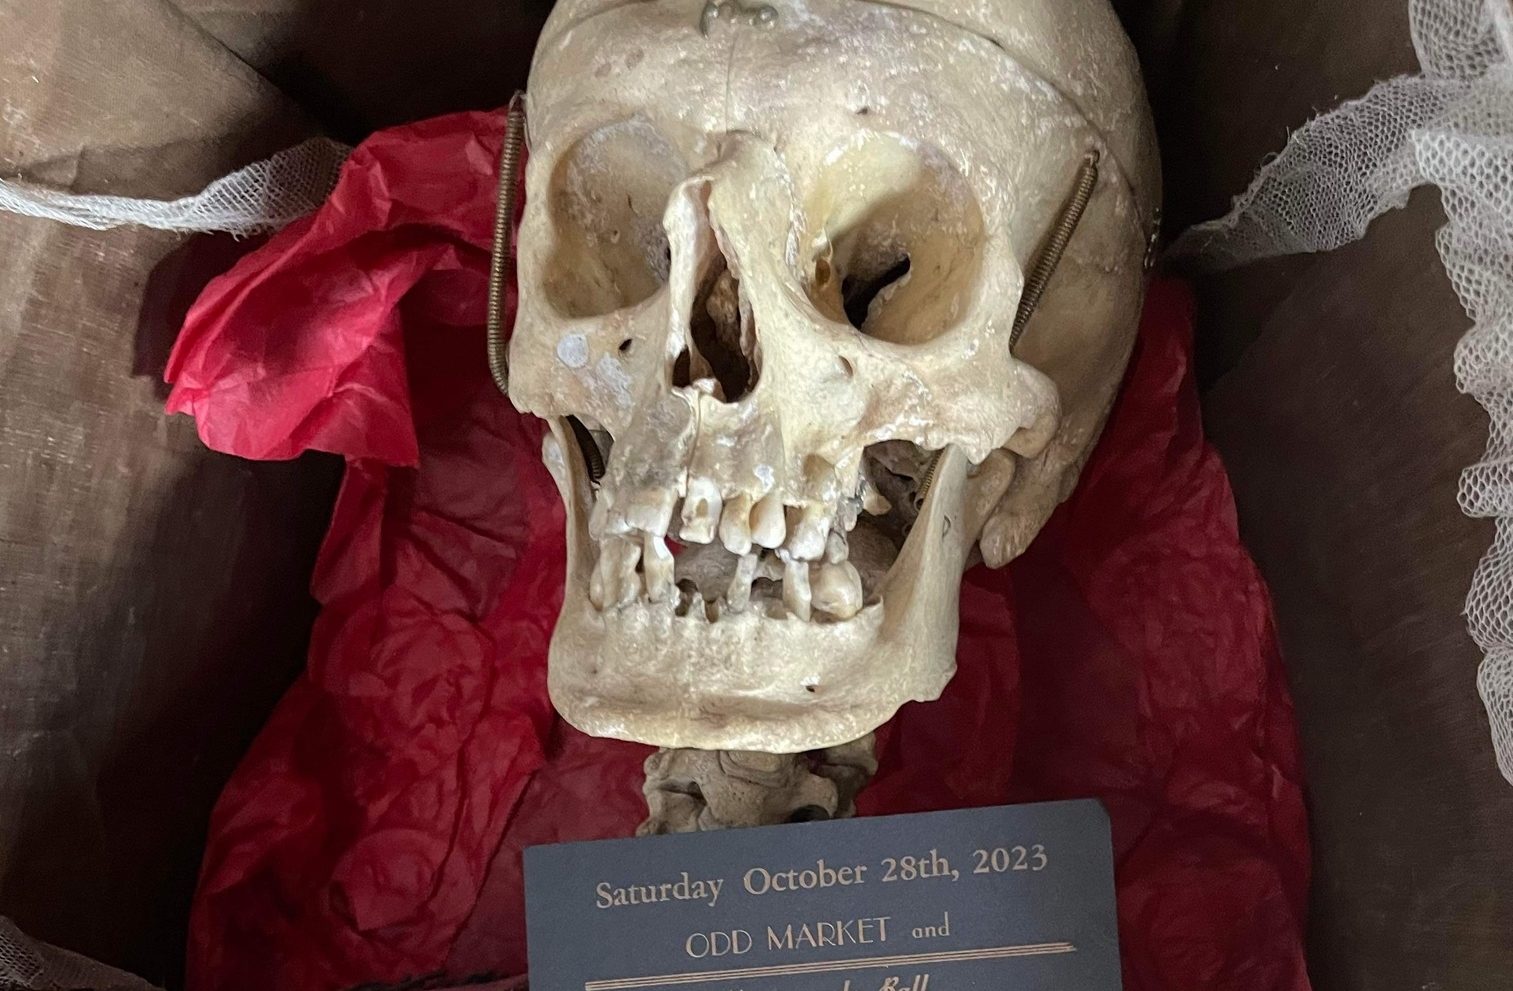 Crop view of a skeleton in a coffin, viewed from the shoulders up. The skull rests on red tissue paper, and is holding an invite for the Odd Market on October 28th.